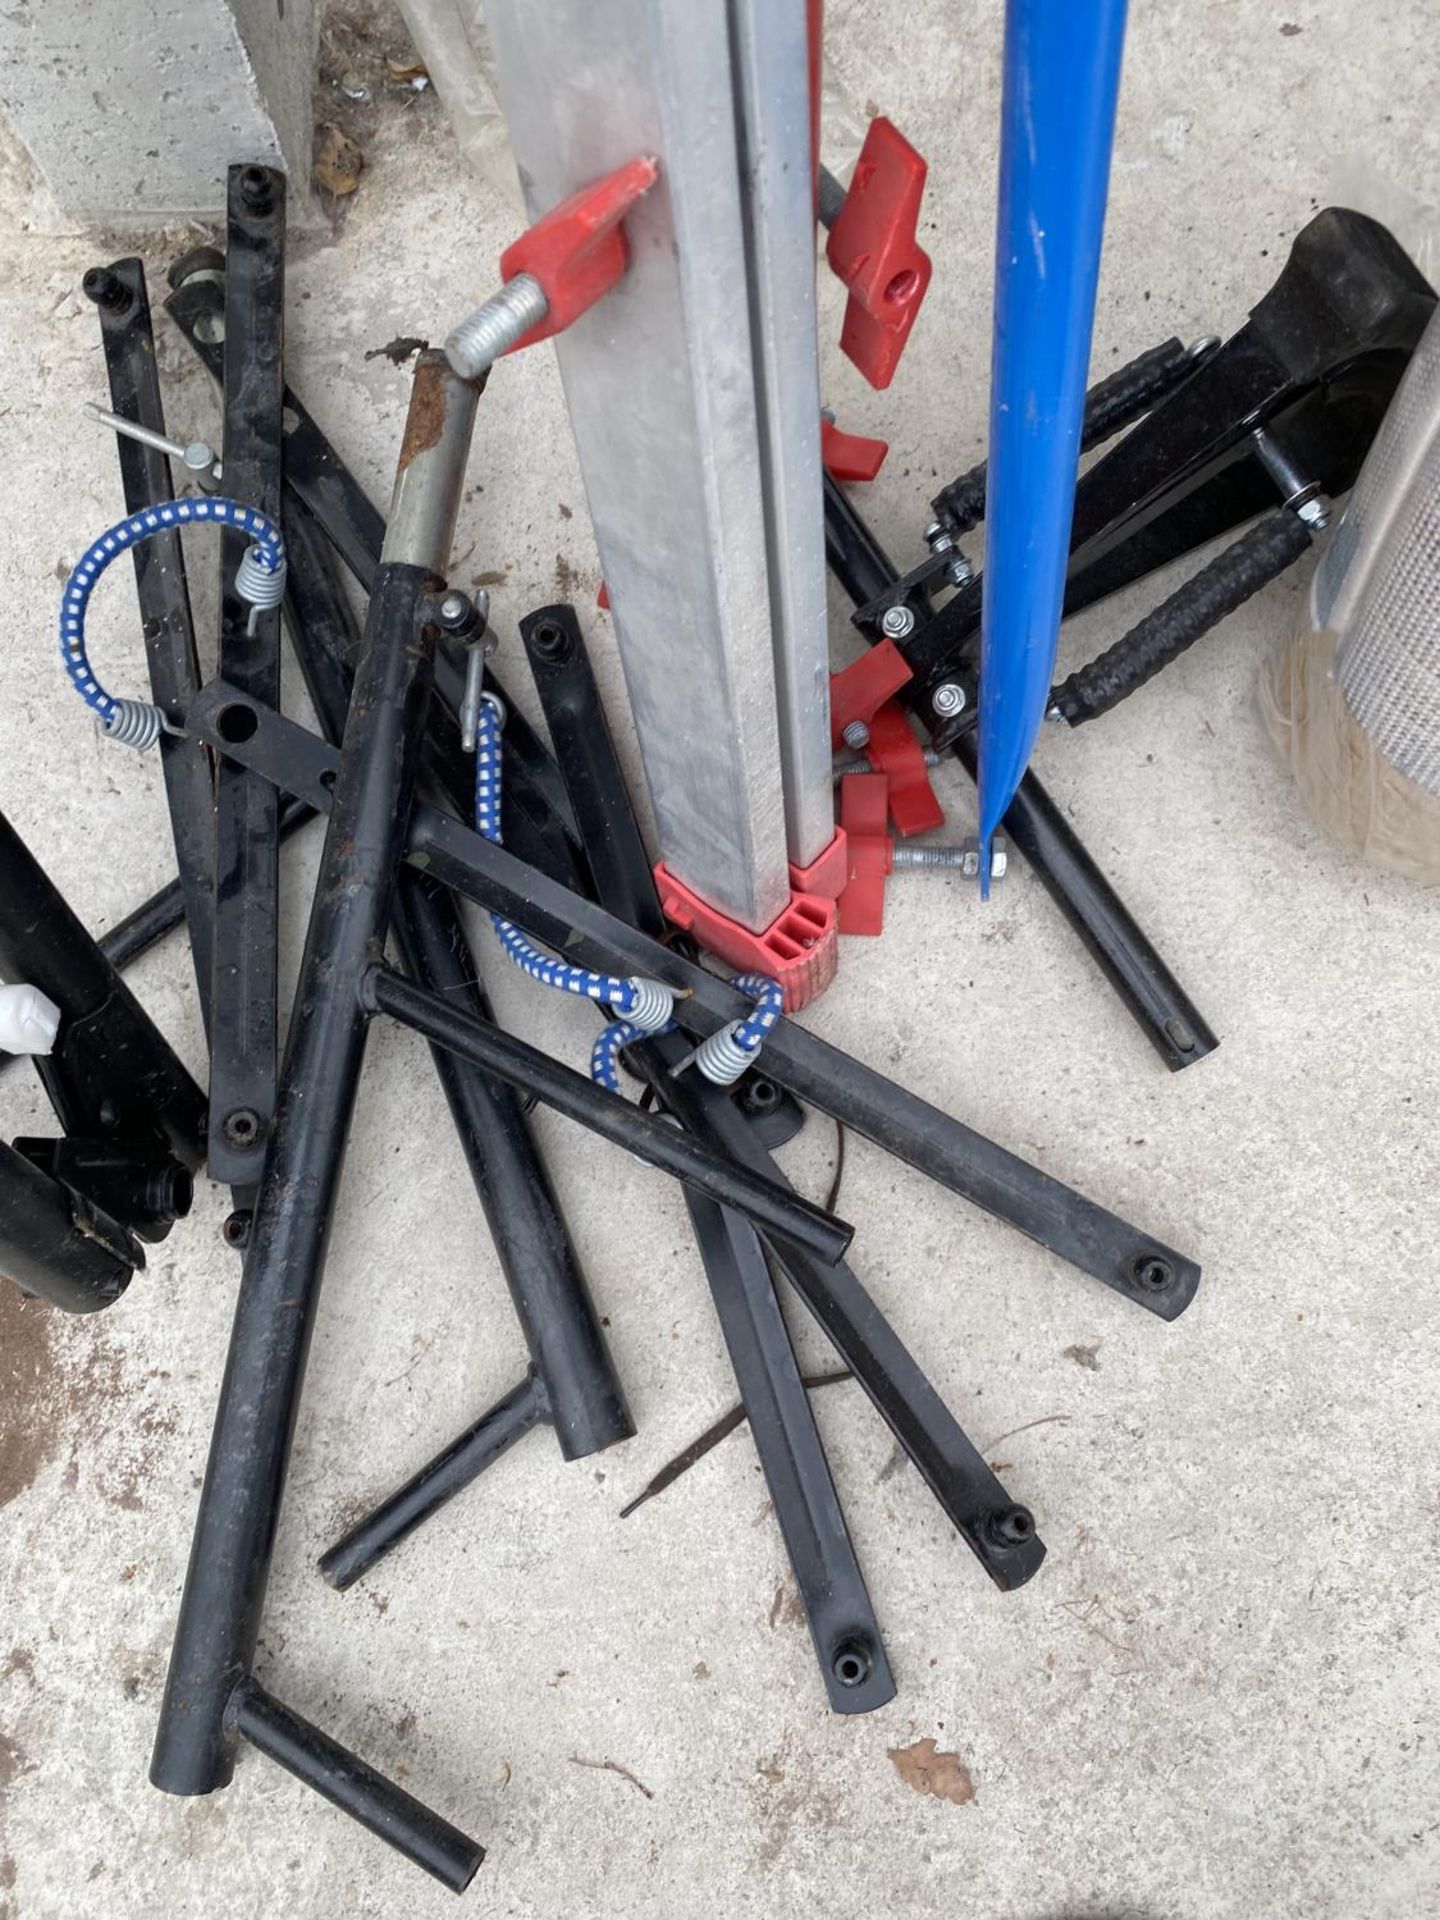 A METAL LADDER AND VARIOUS METAL POLES - Image 11 of 15